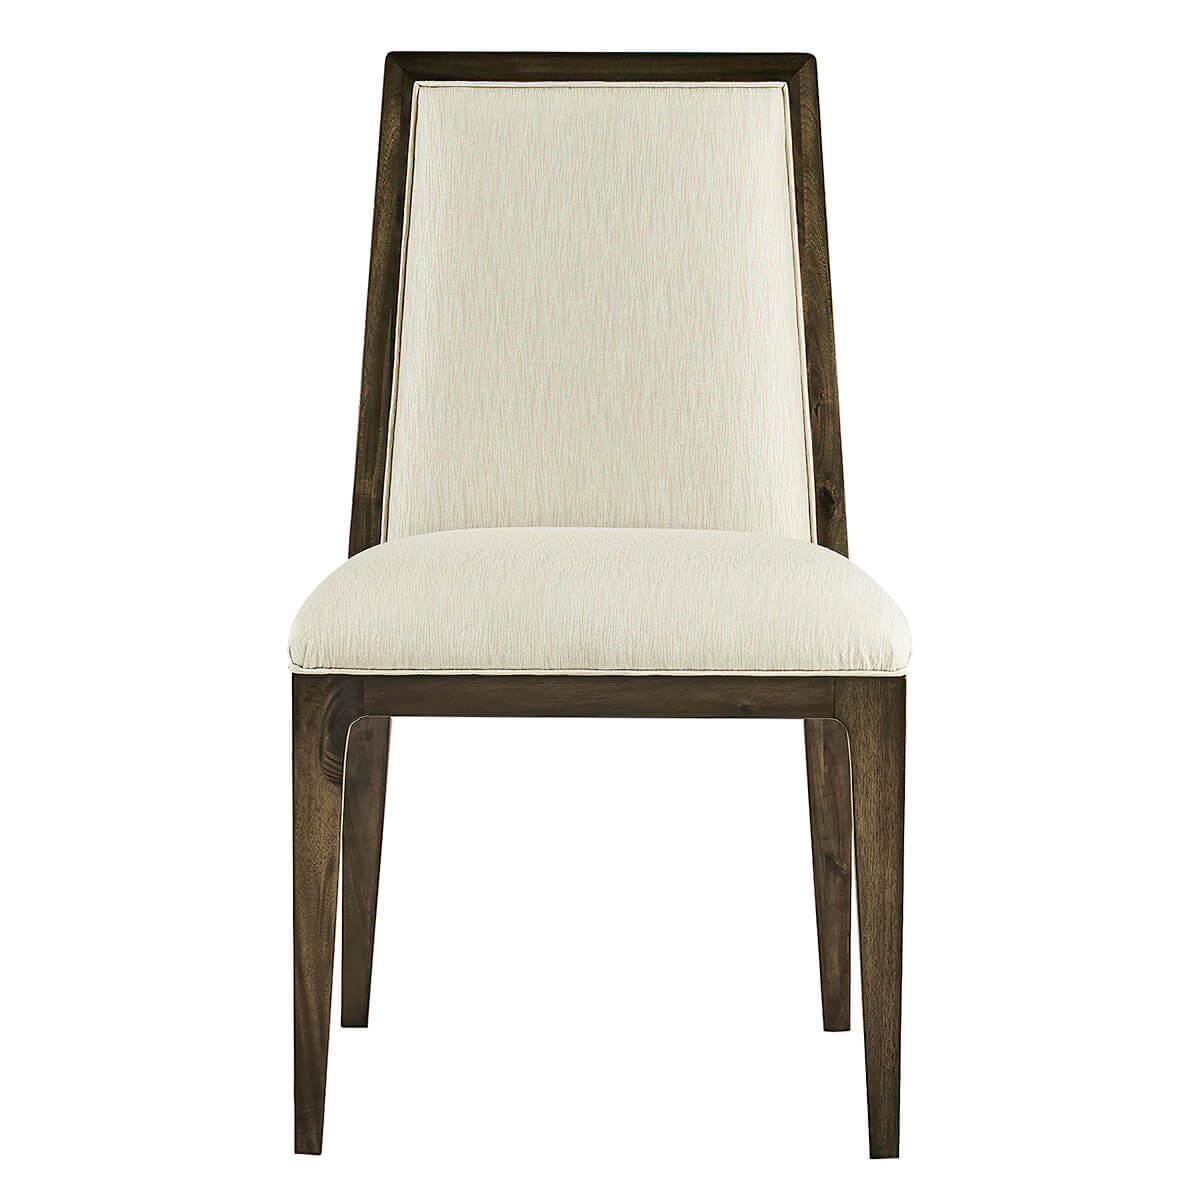 Vietnamese Mid-Century Modern Style Dining Chairs For Sale